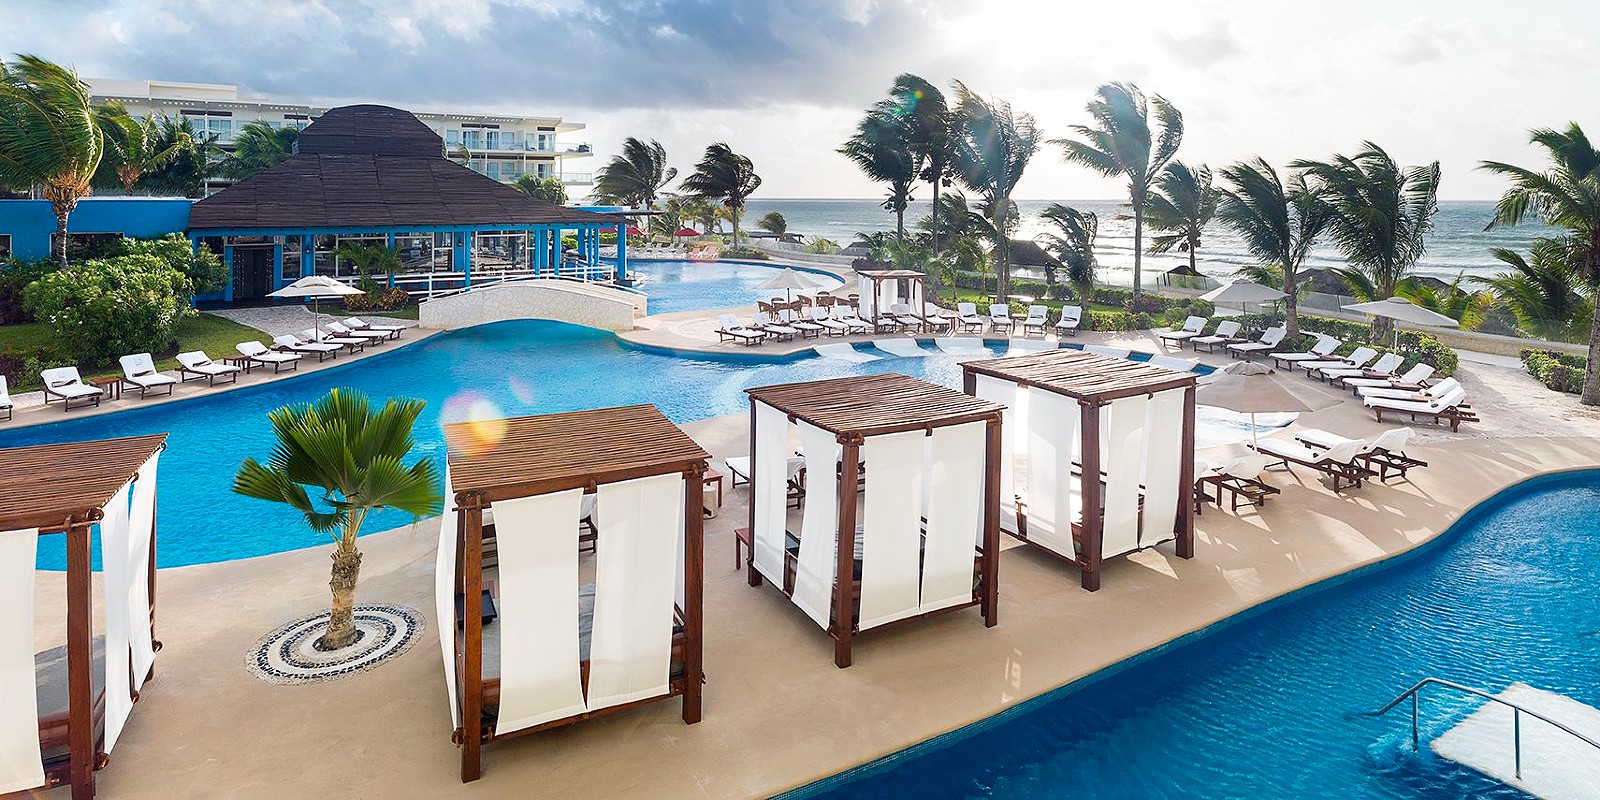 Travel blog: 6 Iconic Resorts In Riviera Maya For Couples